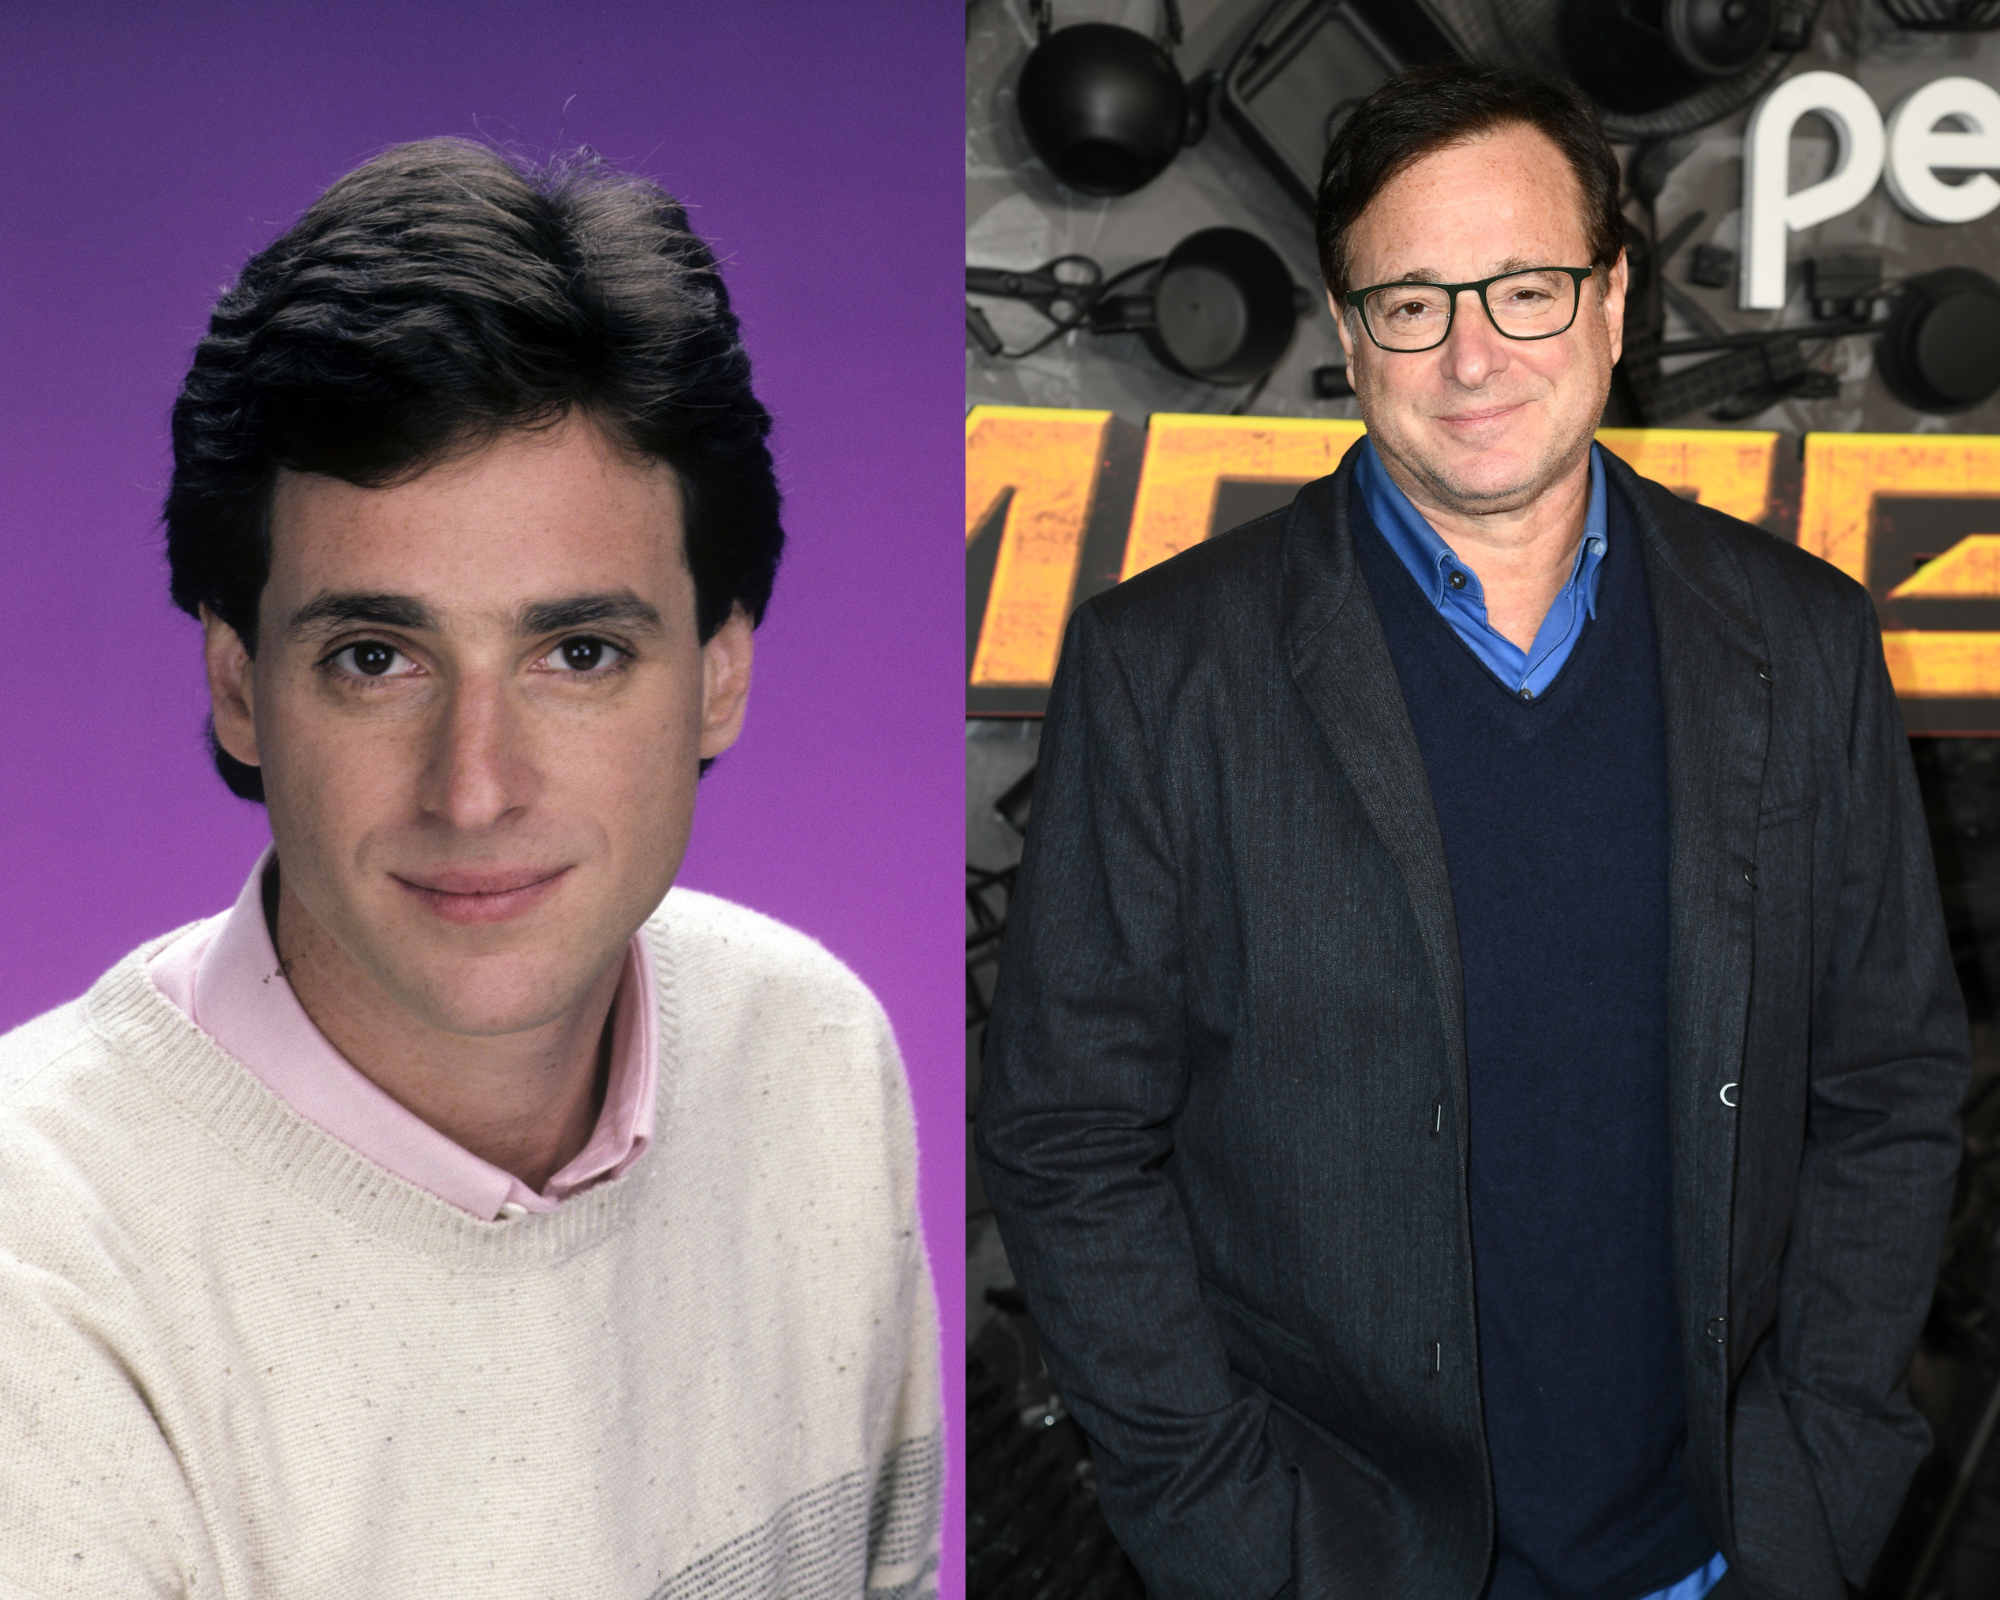 Bob Saget’s cast gallery photo in 1987 | Bob Saget at the California Science Center on December 08, 2021 in Los Angeles, California | Source: Getty Images